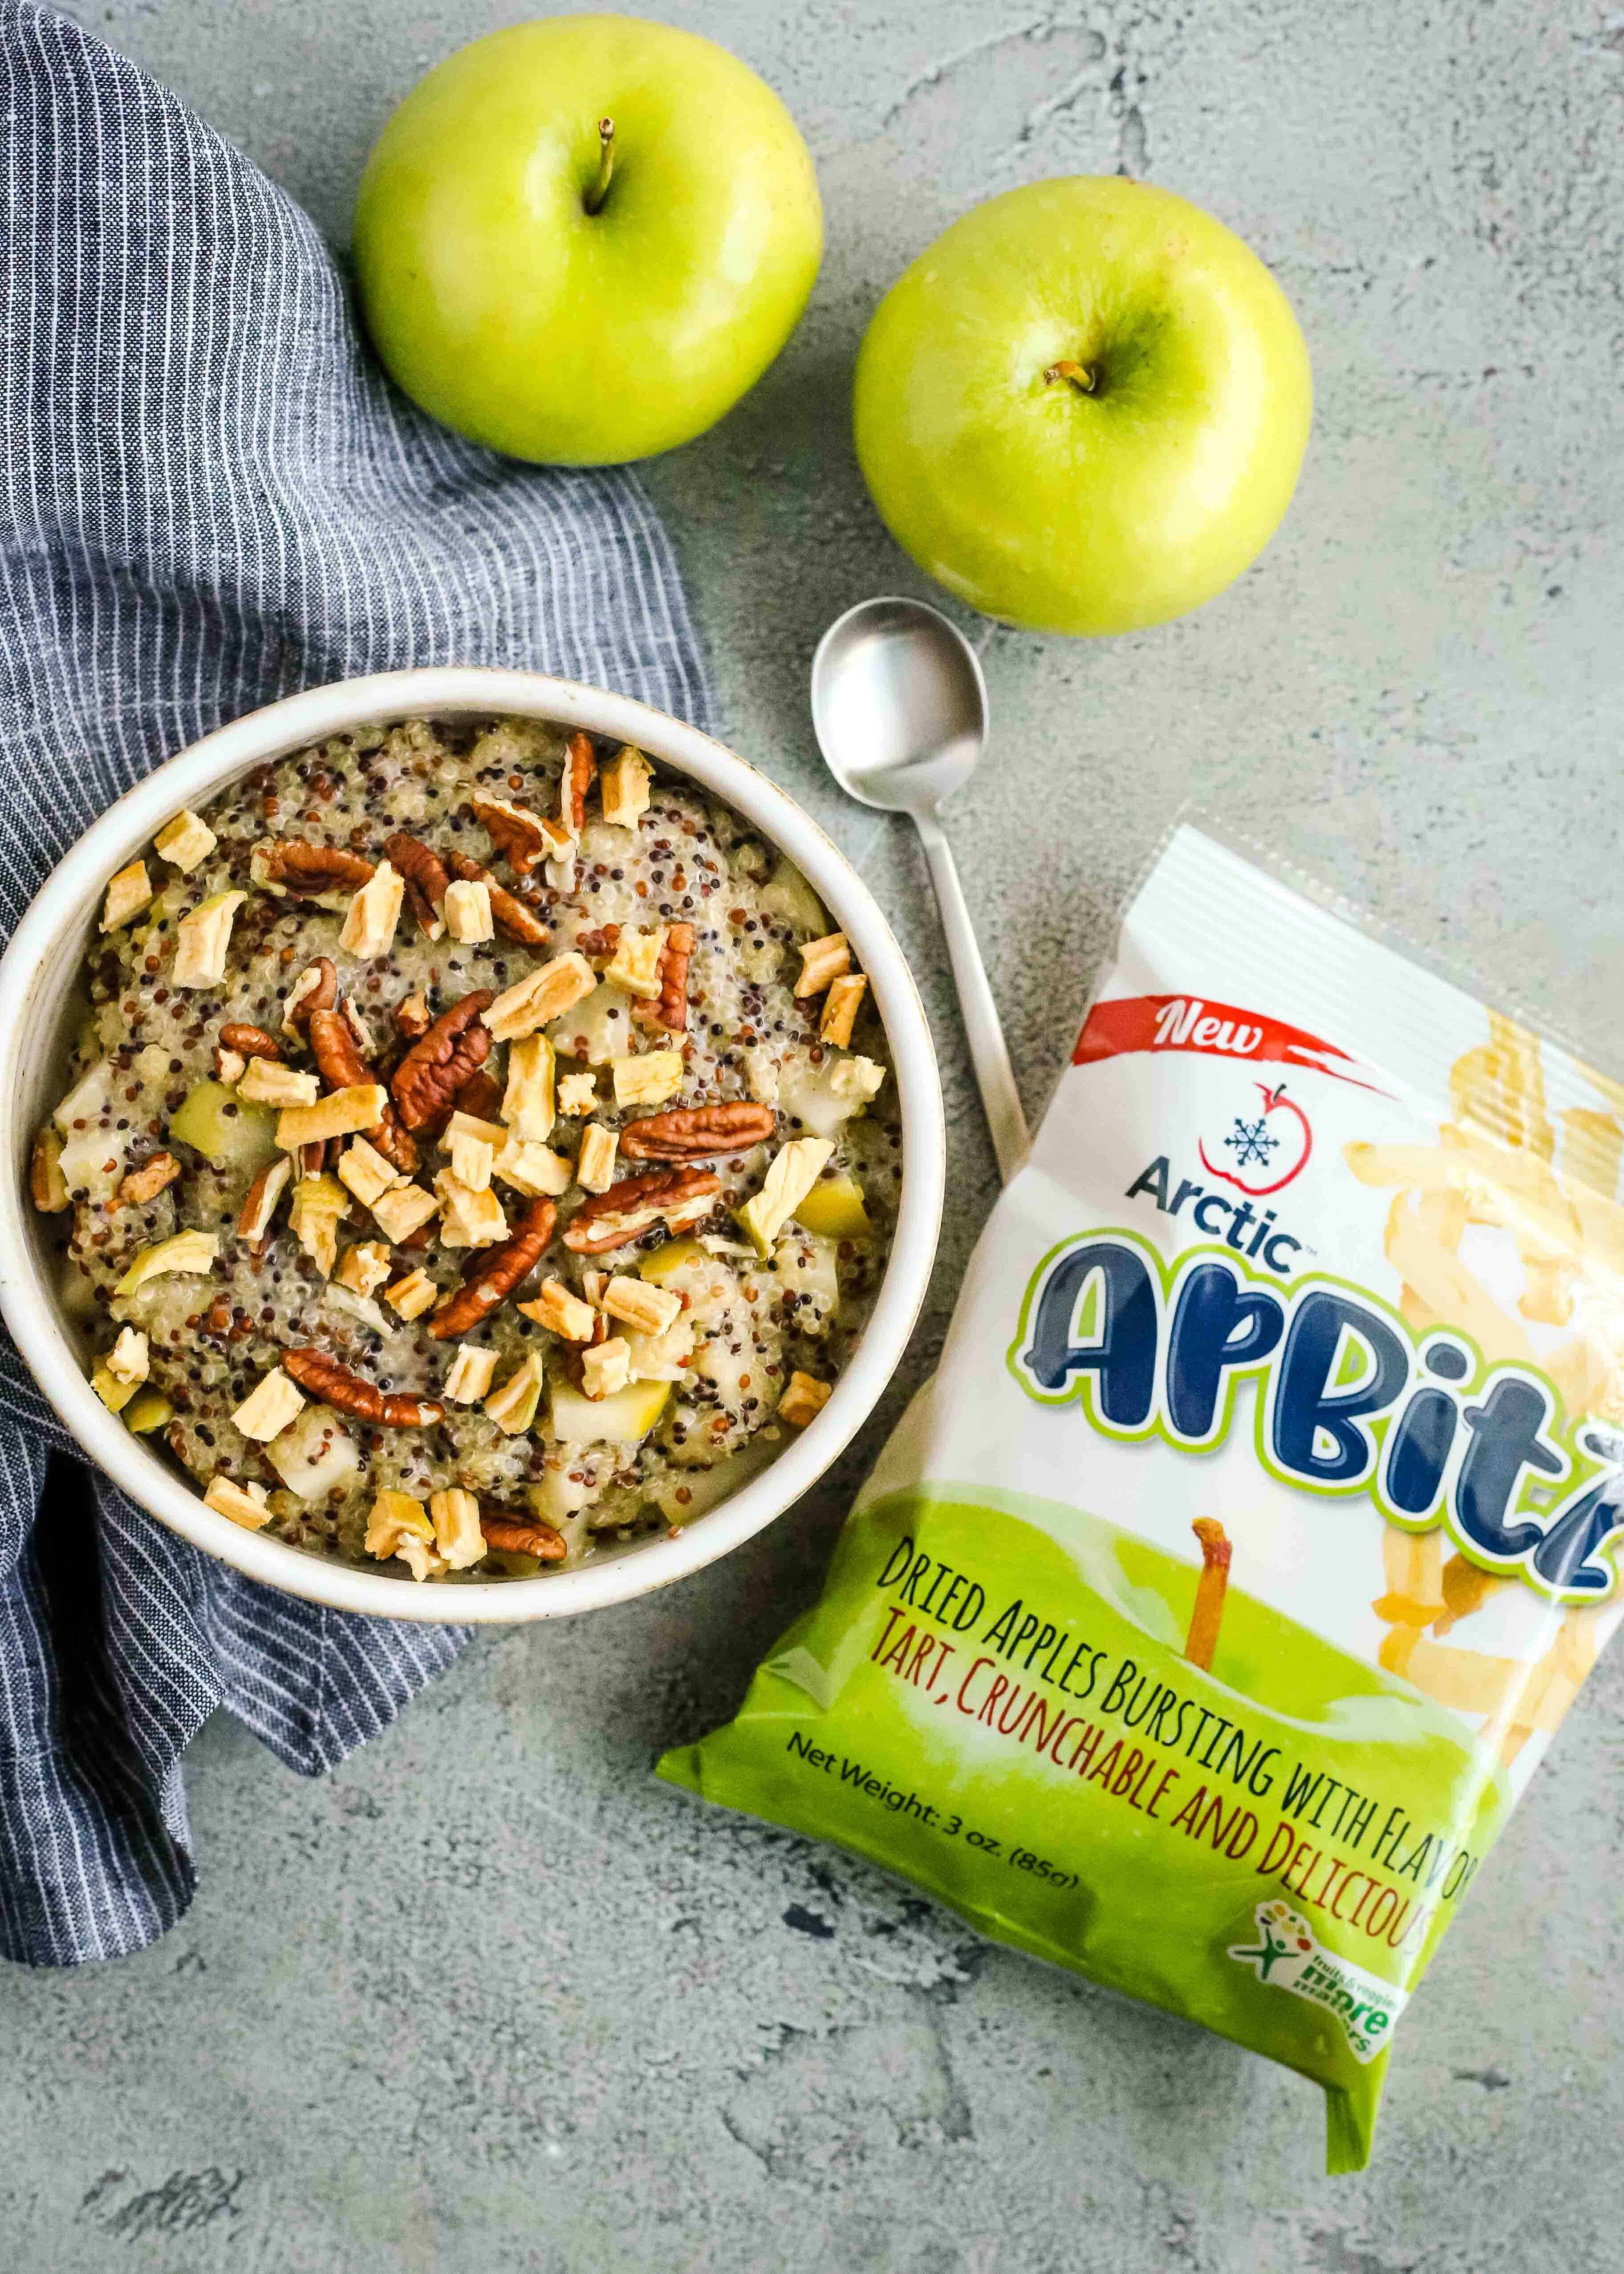 Change up your hot breakfast routine with this simple & filling recipe for cinnamon apple breakfast quinoa made with Arctic® Apple Grannies and ApBitz™